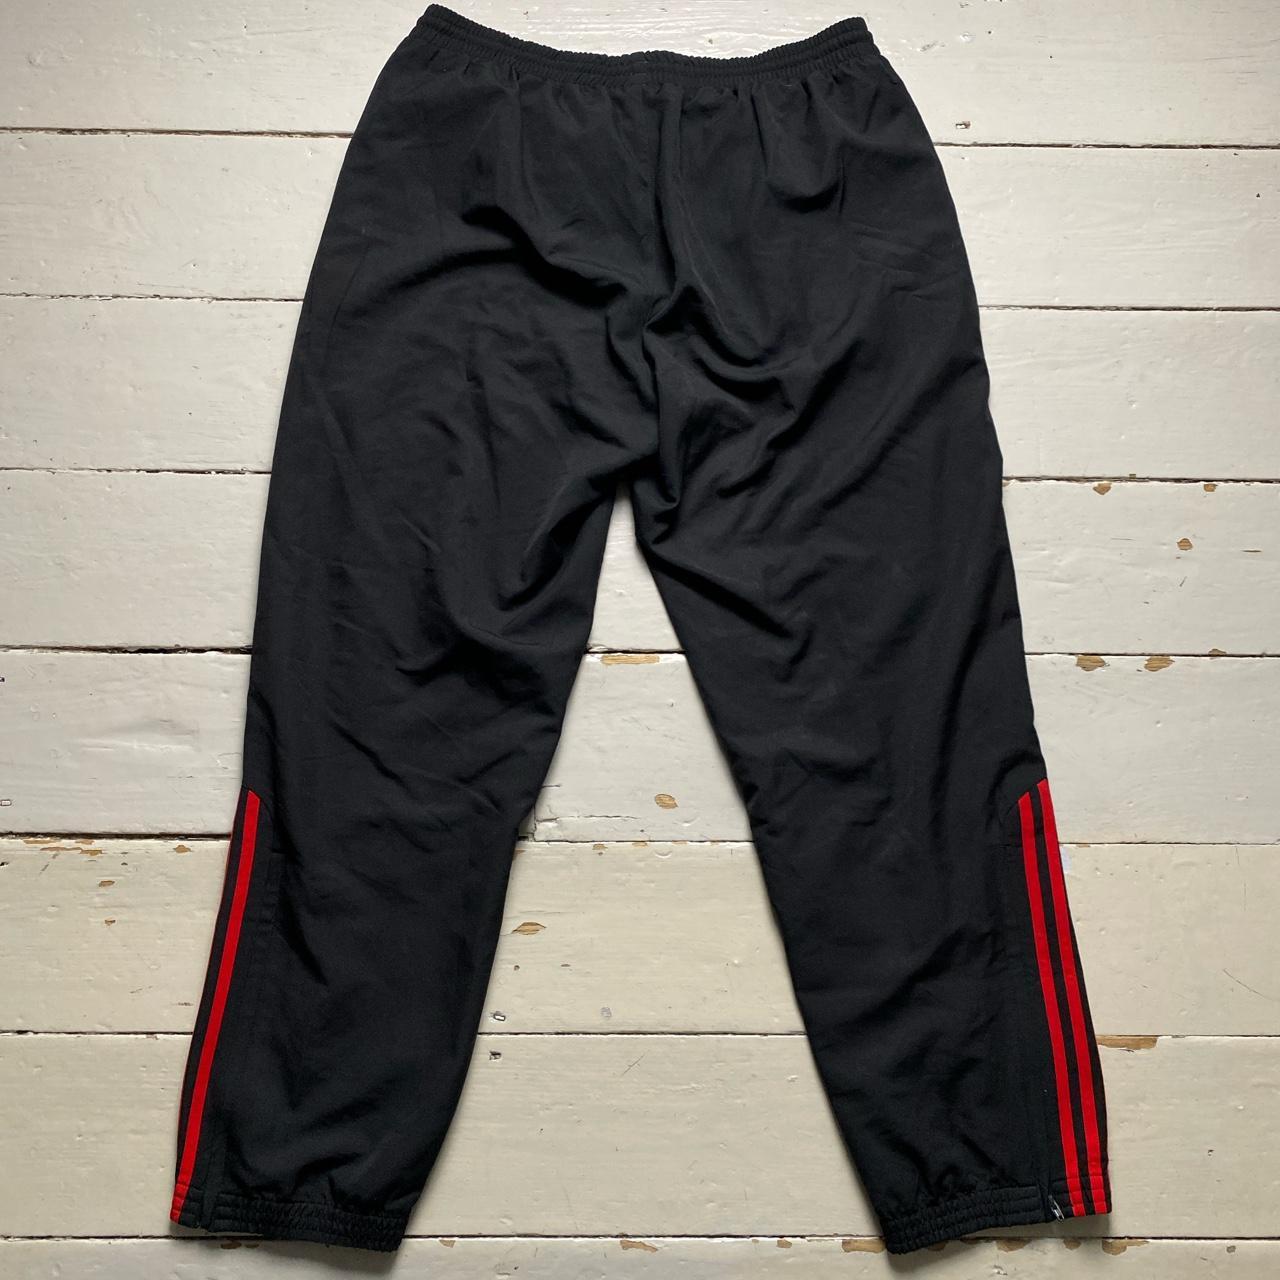 Adidas Black and Red Stripe Baggy Shell Trackpant Bottoms